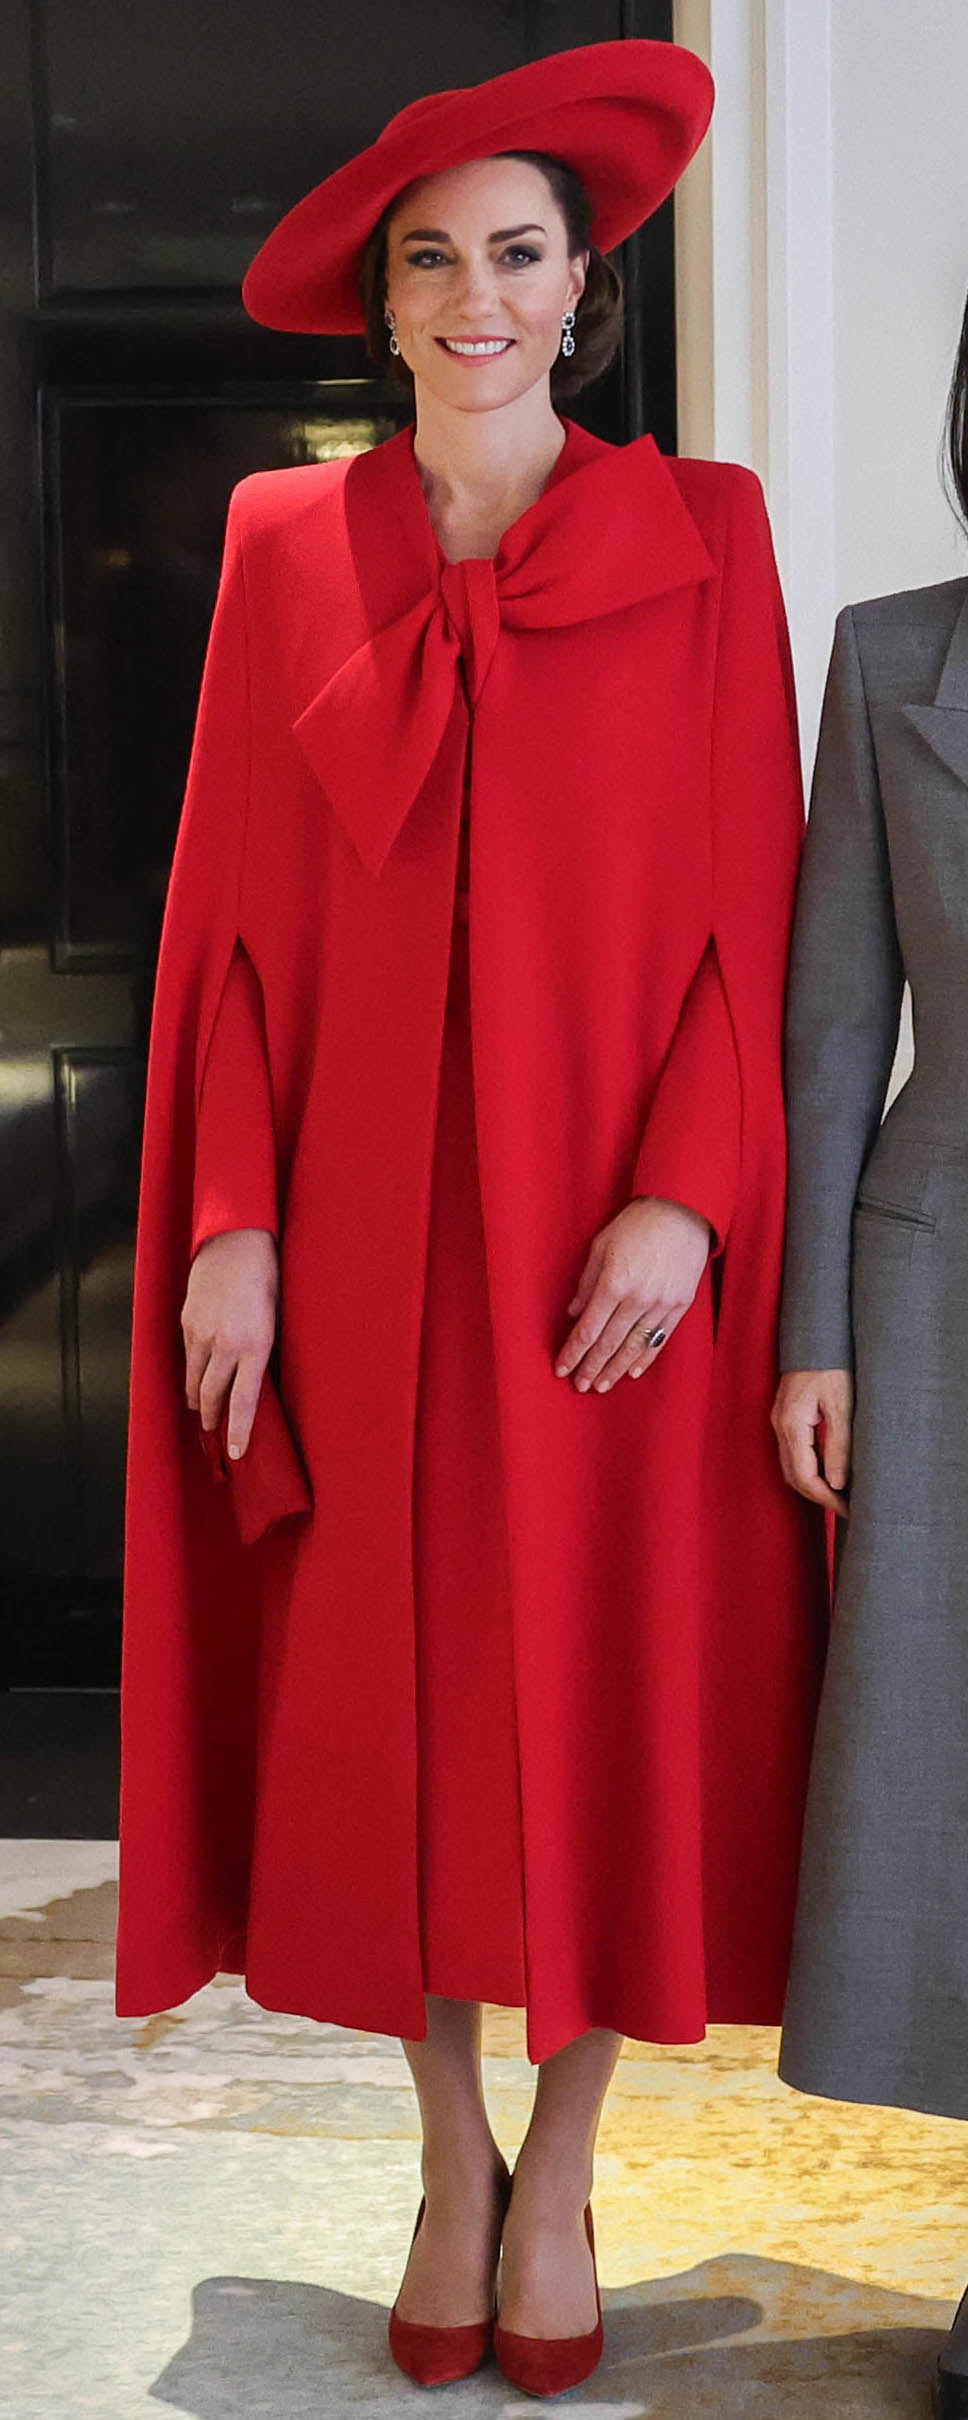 Catherine Walker Cape Coat in Scarlet Red as seen on Kate Middleton, Princess of Wales.